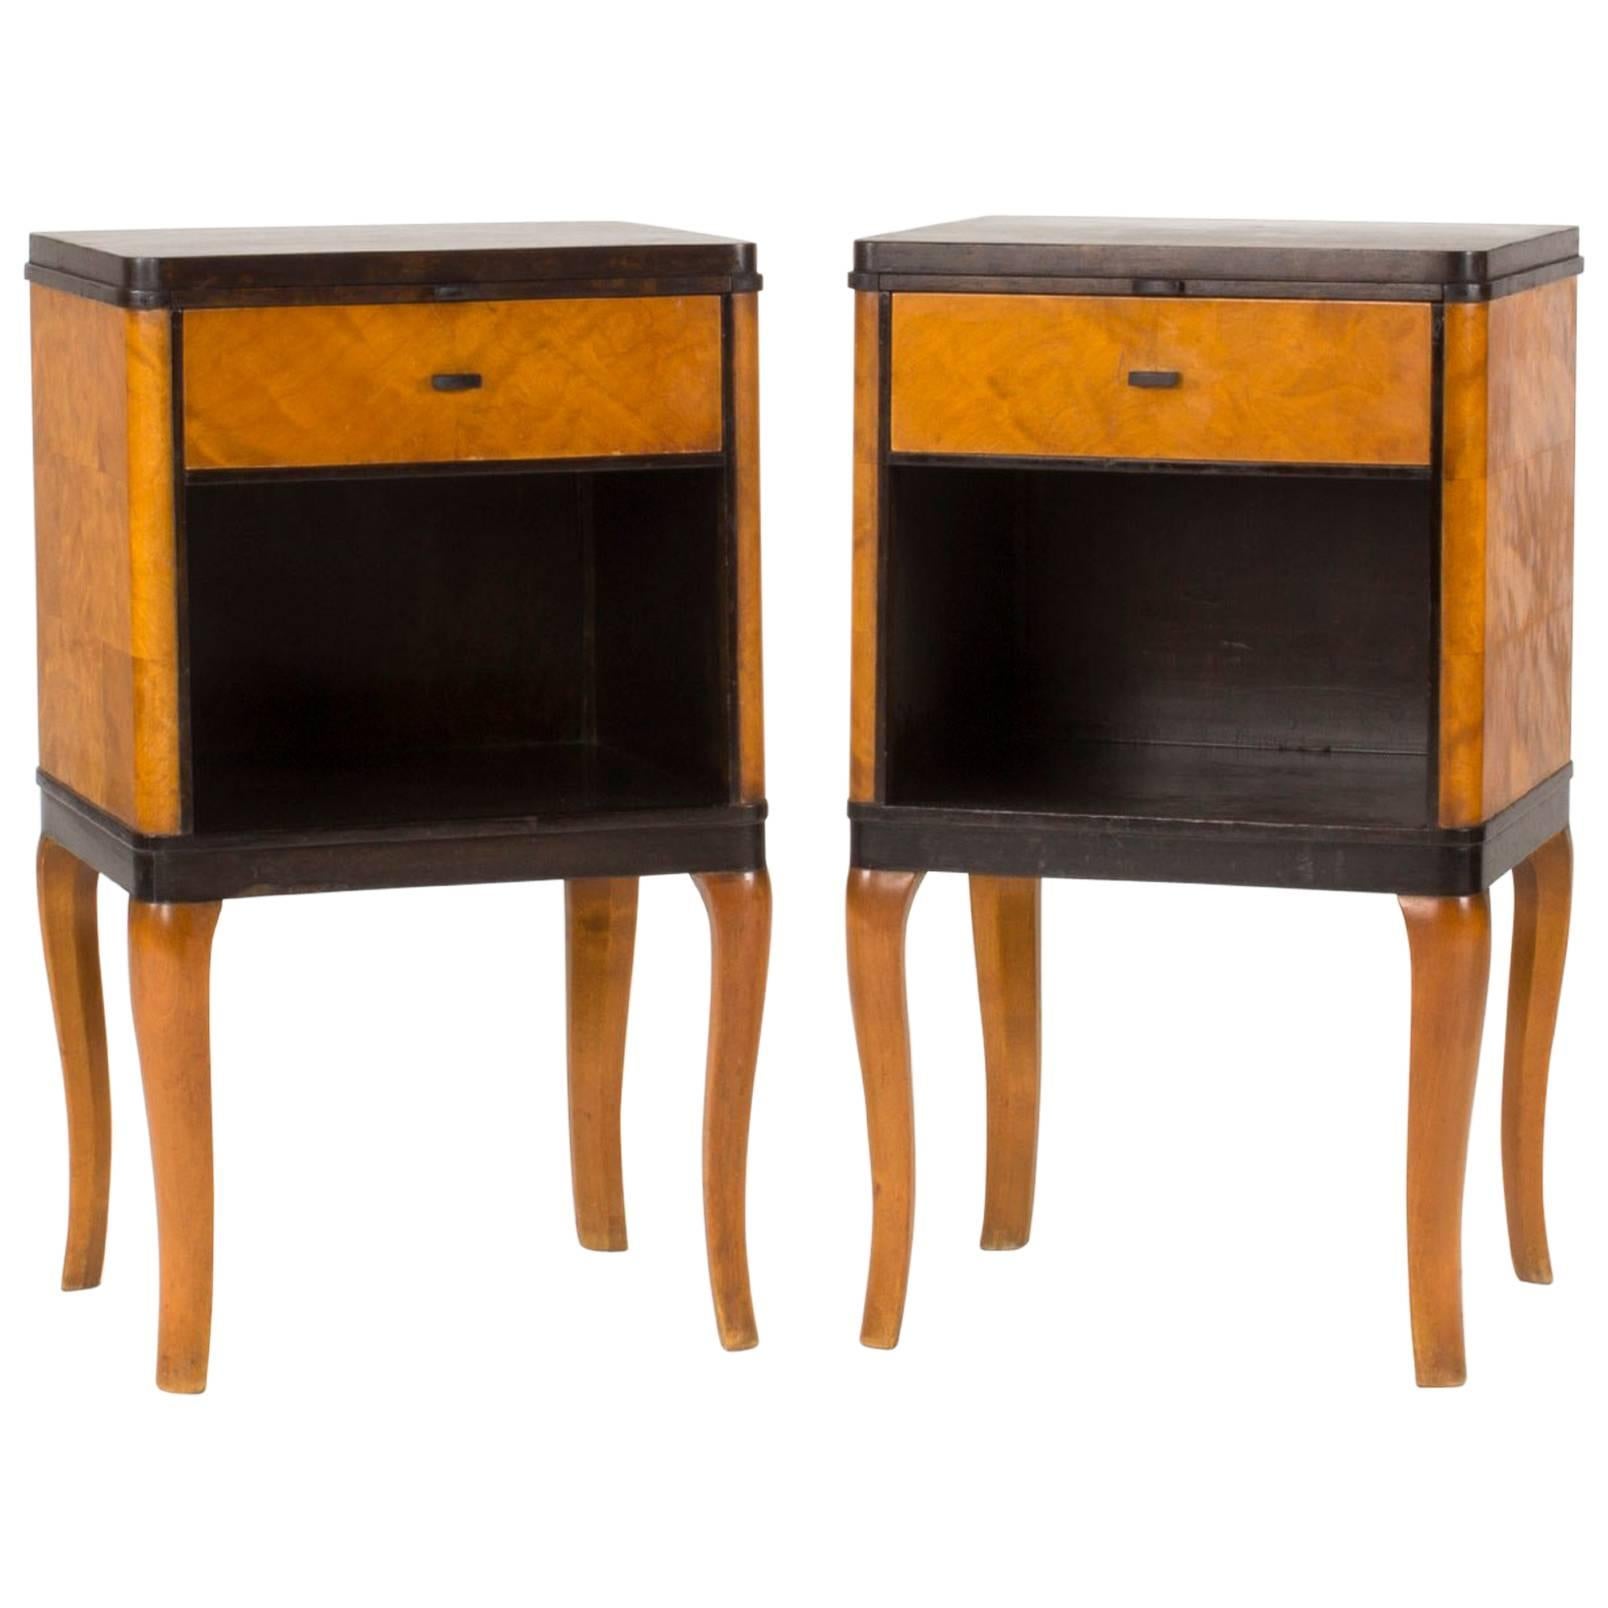 Pair of "Haga" Bedside Tables by Carl Malmsten